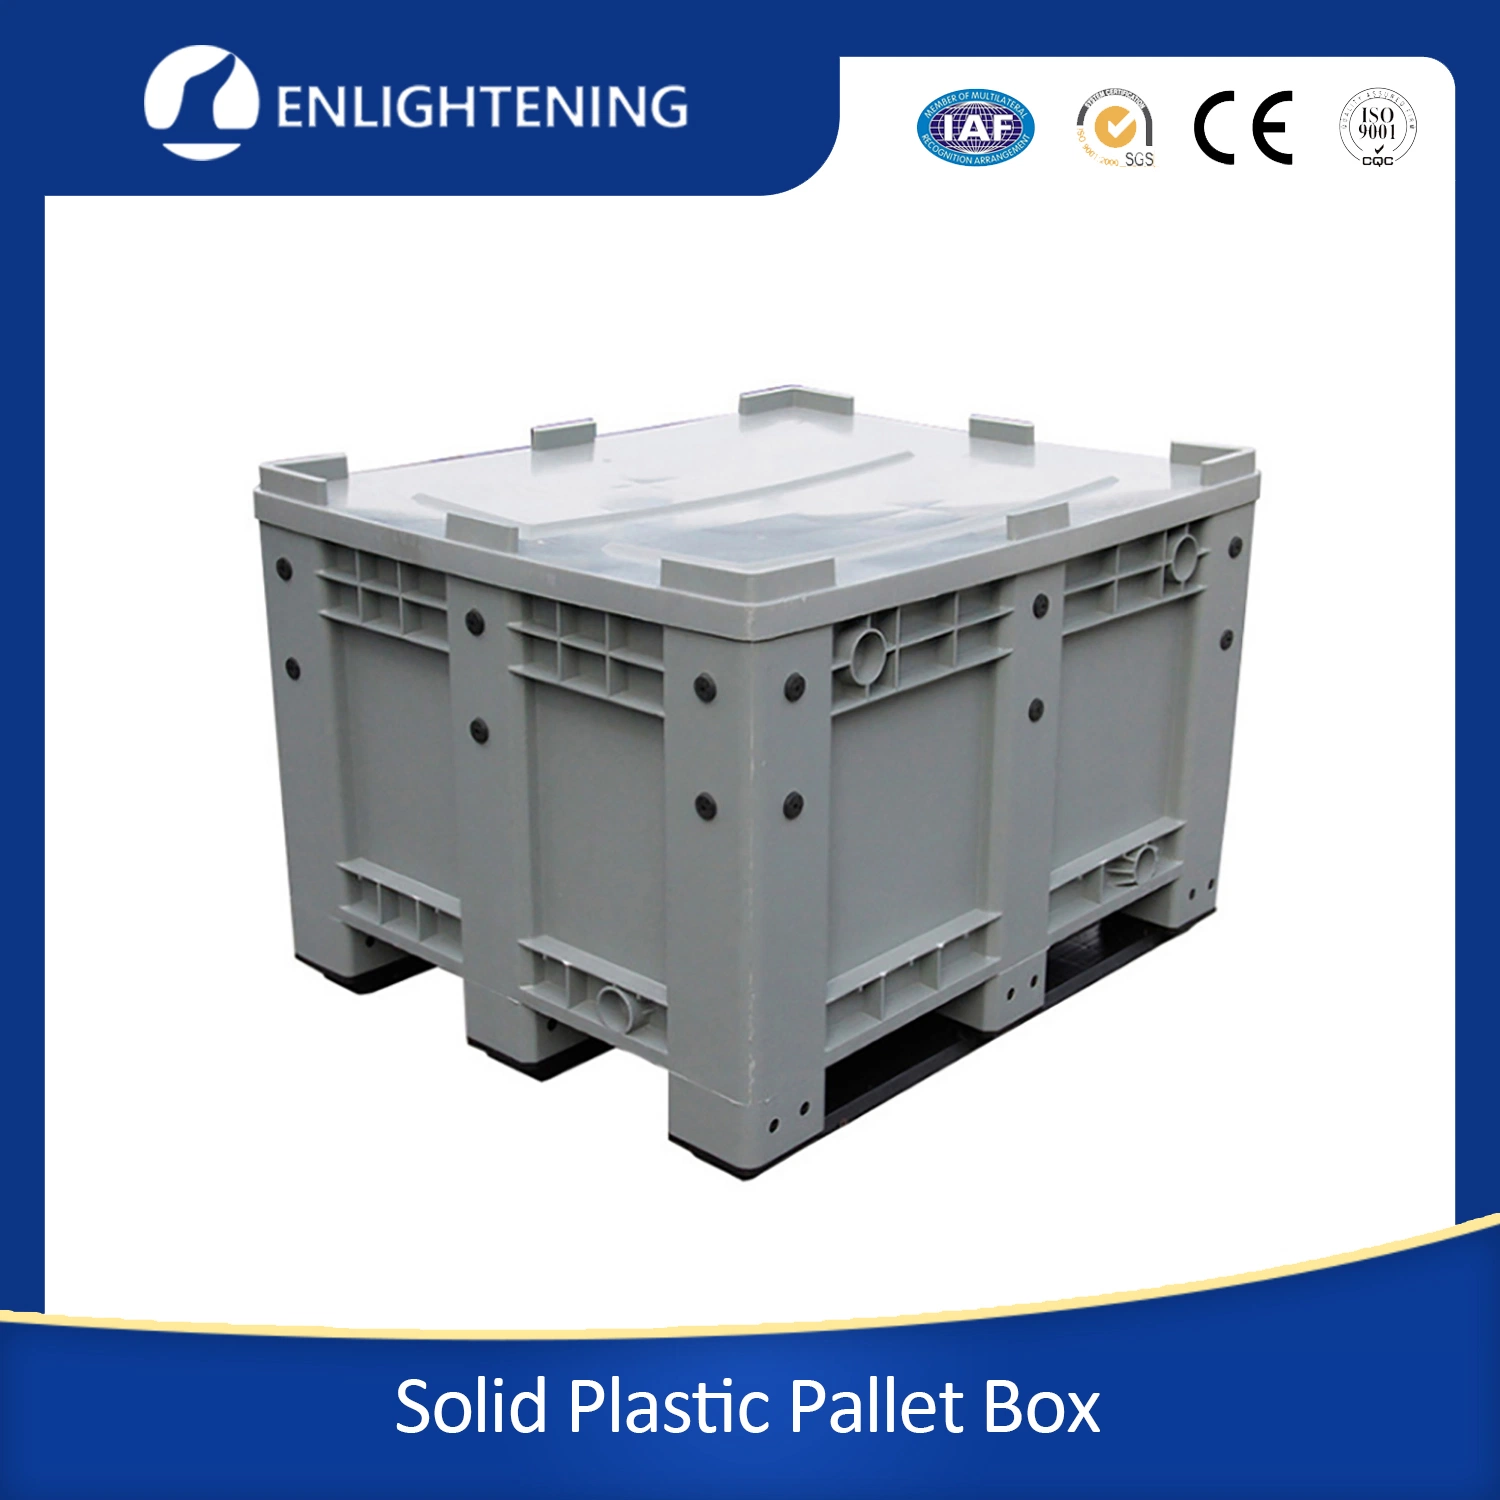 High quality/High cost performance  Solid Plastic Pallet Box Cargo Storage Equipment